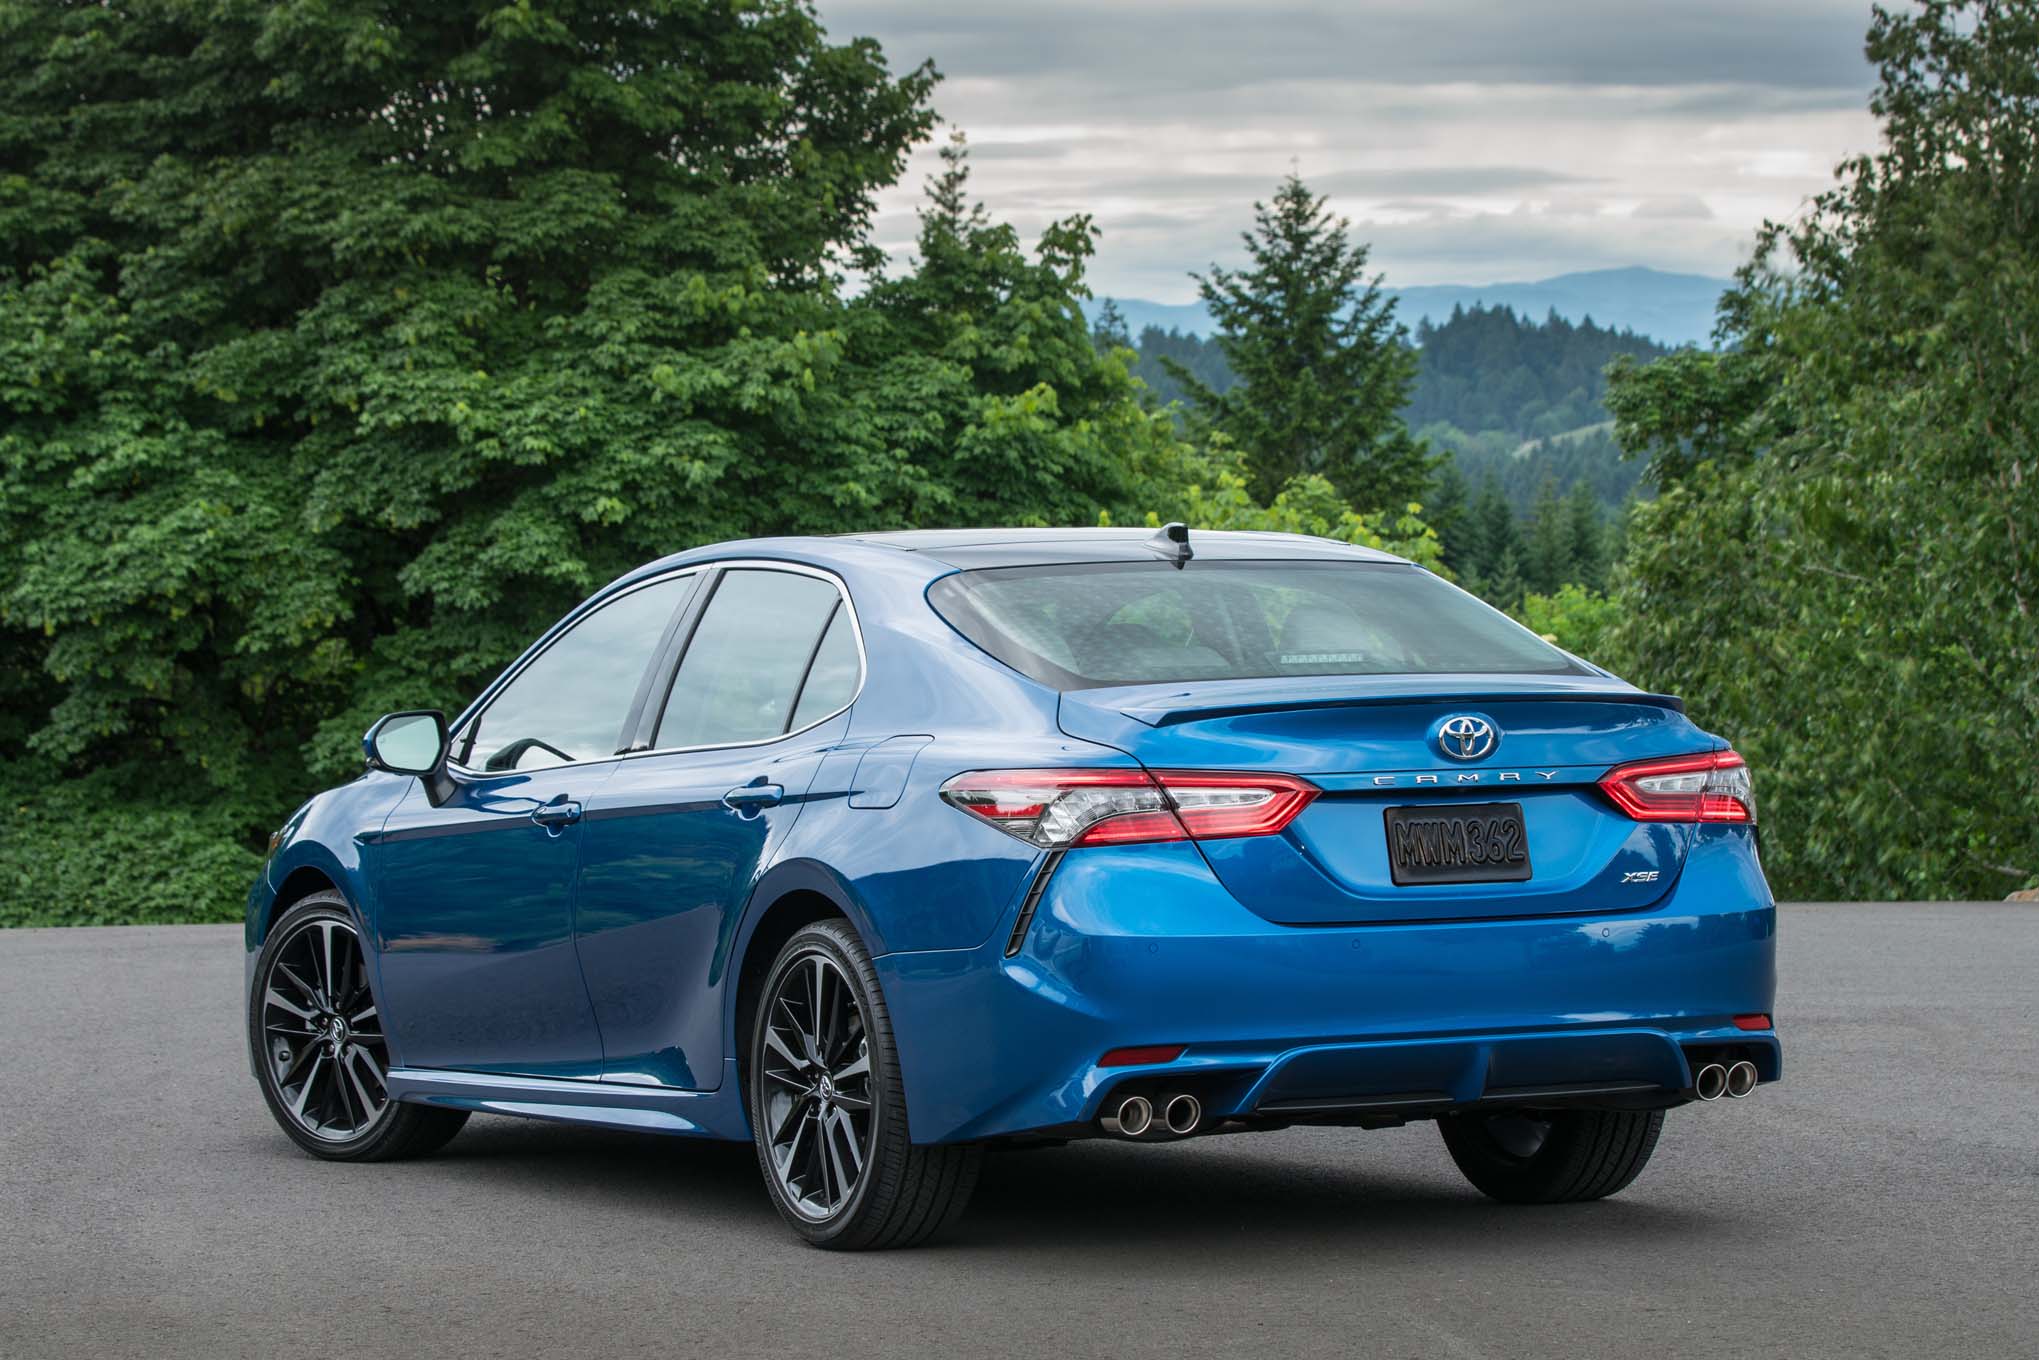 5-best-aftermarket-parts-for-your-toyota-camry-techno-faq